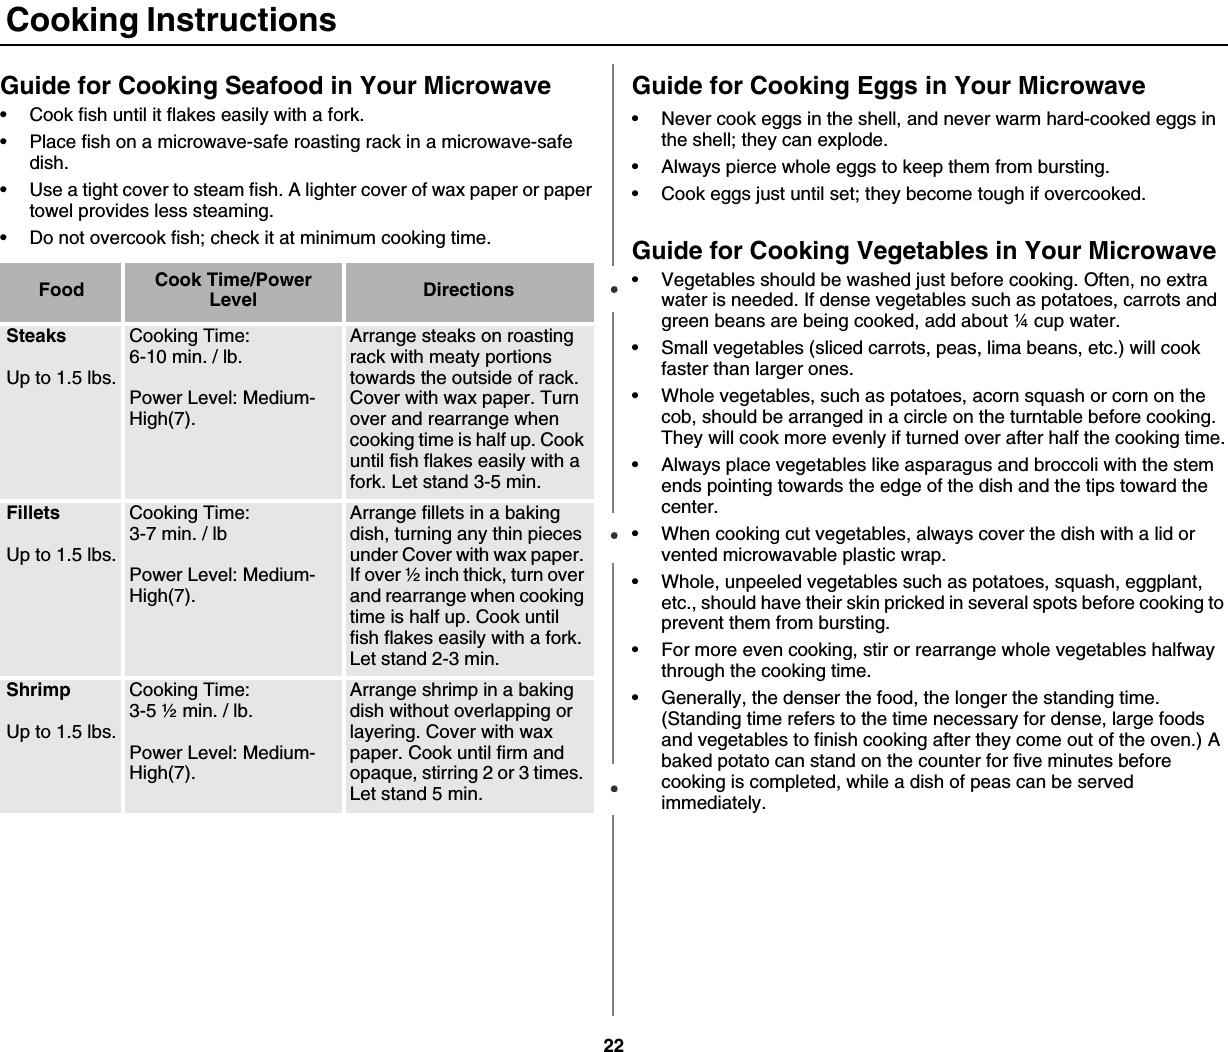 22 Cooking InstructionsGuide for Cooking Seafood in Your Microwave• Cook fish until it flakes easily with a fork.• Place fish on a microwave-safe roasting rack in a microwave-safe dish.• Use a tight cover to steam fish. A lighter cover of wax paper or paper towel provides less steaming.• Do not overcook fish; check it at minimum cooking time.Guide for Cooking Eggs in Your Microwave• Never cook eggs in the shell, and never warm hard-cooked eggs in the shell; they can explode.• Always pierce whole eggs to keep them from bursting.• Cook eggs just until set; they become tough if overcooked.Guide for Cooking Vegetables in Your Microwave• Vegetables should be washed just before cooking. Often, no extra water is needed. If dense vegetables such as potatoes, carrots and green beans are being cooked, add about ¼ cup water.• Small vegetables (sliced carrots, peas, lima beans, etc.) will cook faster than larger ones.• Whole vegetables, such as potatoes, acorn squash or corn on the cob, should be arranged in a circle on the turntable before cooking. They will cook more evenly if turned over after half the cooking time.• Always place vegetables like asparagus and broccoli with the stem ends pointing towards the edge of the dish and the tips toward the center.• When cooking cut vegetables, always cover the dish with a lid or vented microwavable plastic wrap.• Whole, unpeeled vegetables such as potatoes, squash, eggplant, etc., should have their skin pricked in several spots before cooking to prevent them from bursting.• For more even cooking, stir or rearrange whole vegetables halfway through the cooking time.• Generally, the denser the food, the longer the standing time. (Standing time refers to the time necessary for dense, large foods and vegetables to finish cooking after they come out of the oven.) A baked potato can stand on the counter for five minutes before cooking is completed, while a dish of peas can be served immediately.Food Cook Time/Power Level DirectionsSteaksUp to 1.5 lbs.Cooking Time: 6-10 min. / lb. Power Level: Medium-High(7).Arrange steaks on roasting rack with meaty portions towards the outside of rack. Cover with wax paper. Turn over and rearrange when cooking time is half up. Cook until fish flakes easily with a fork. Let stand 3-5 min. FilletsUp to 1.5 lbs.Cooking Time: 3-7 min. / lbPower Level: Medium-High(7).Arrange fillets in a baking dish, turning any thin pieces under Cover with wax paper. If over ½ inch thick, turn over and rearrange when cooking time is half up. Cook until fish flakes easily with a fork. Let stand 2-3 min.ShrimpUp to 1.5 lbs.Cooking Time: 3-5 ½ min. / lb.Power Level: Medium-High(7).Arrange shrimp in a baking dish without overlapping or layering. Cover with wax paper. Cook until firm and opaque, stirring 2 or 3 times. Let stand 5 min. 